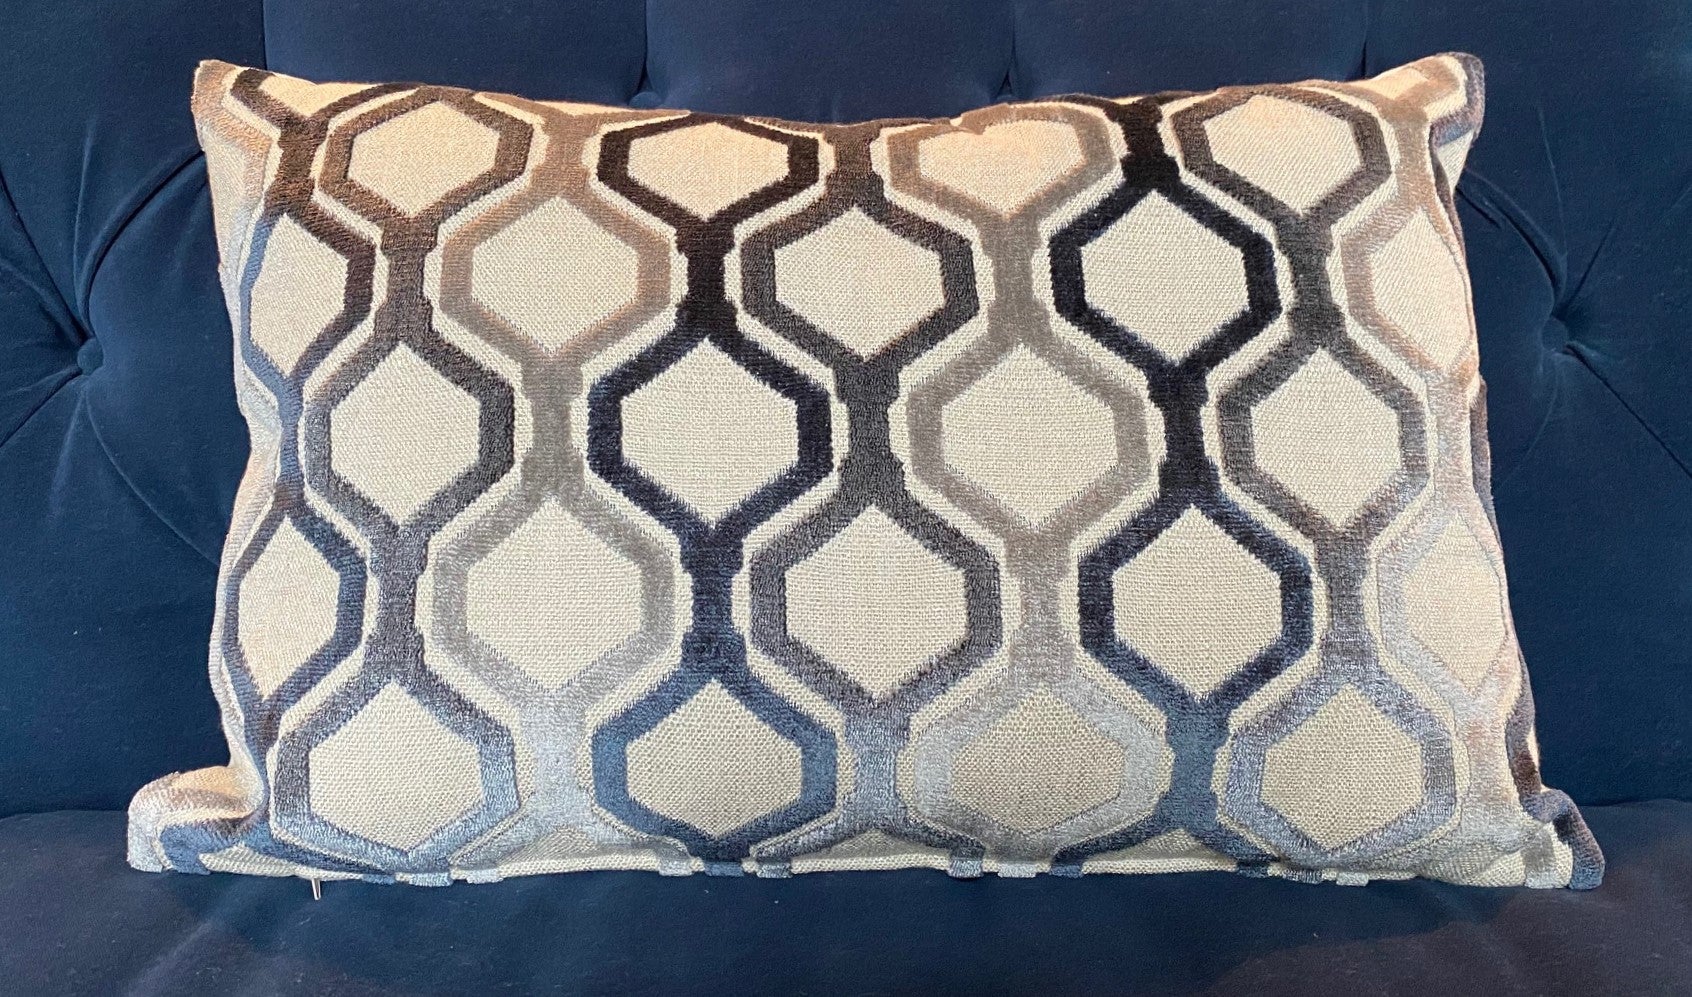 Geometric cut velvet knife-edge rectangular pillow (zippered case and down insert). Steel gray, navy and cream colorway; navy can read almost black in certain light. Reverse side in a contrasting cream velvet. Custom-made by an expert